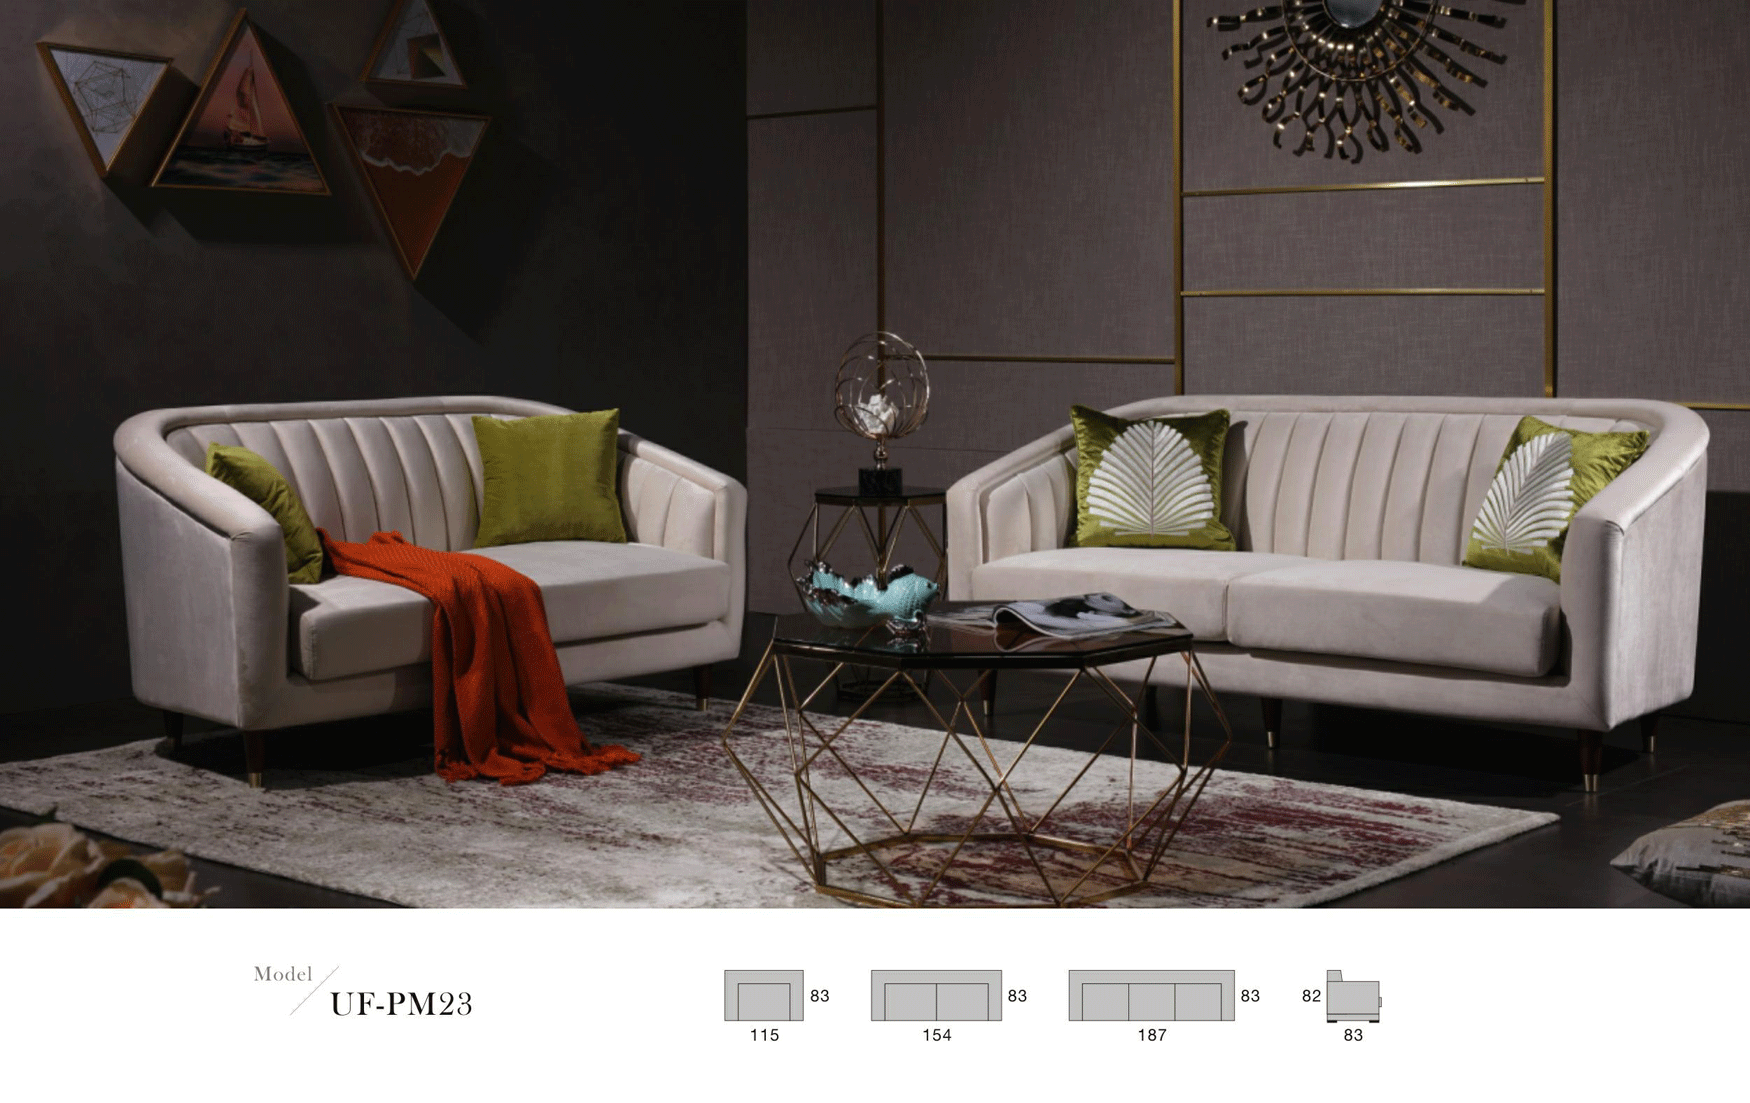 Living Room Furniture Sleepers Sofas Loveseats and Chairs PM23 LIVING ROOM SET FABRIC